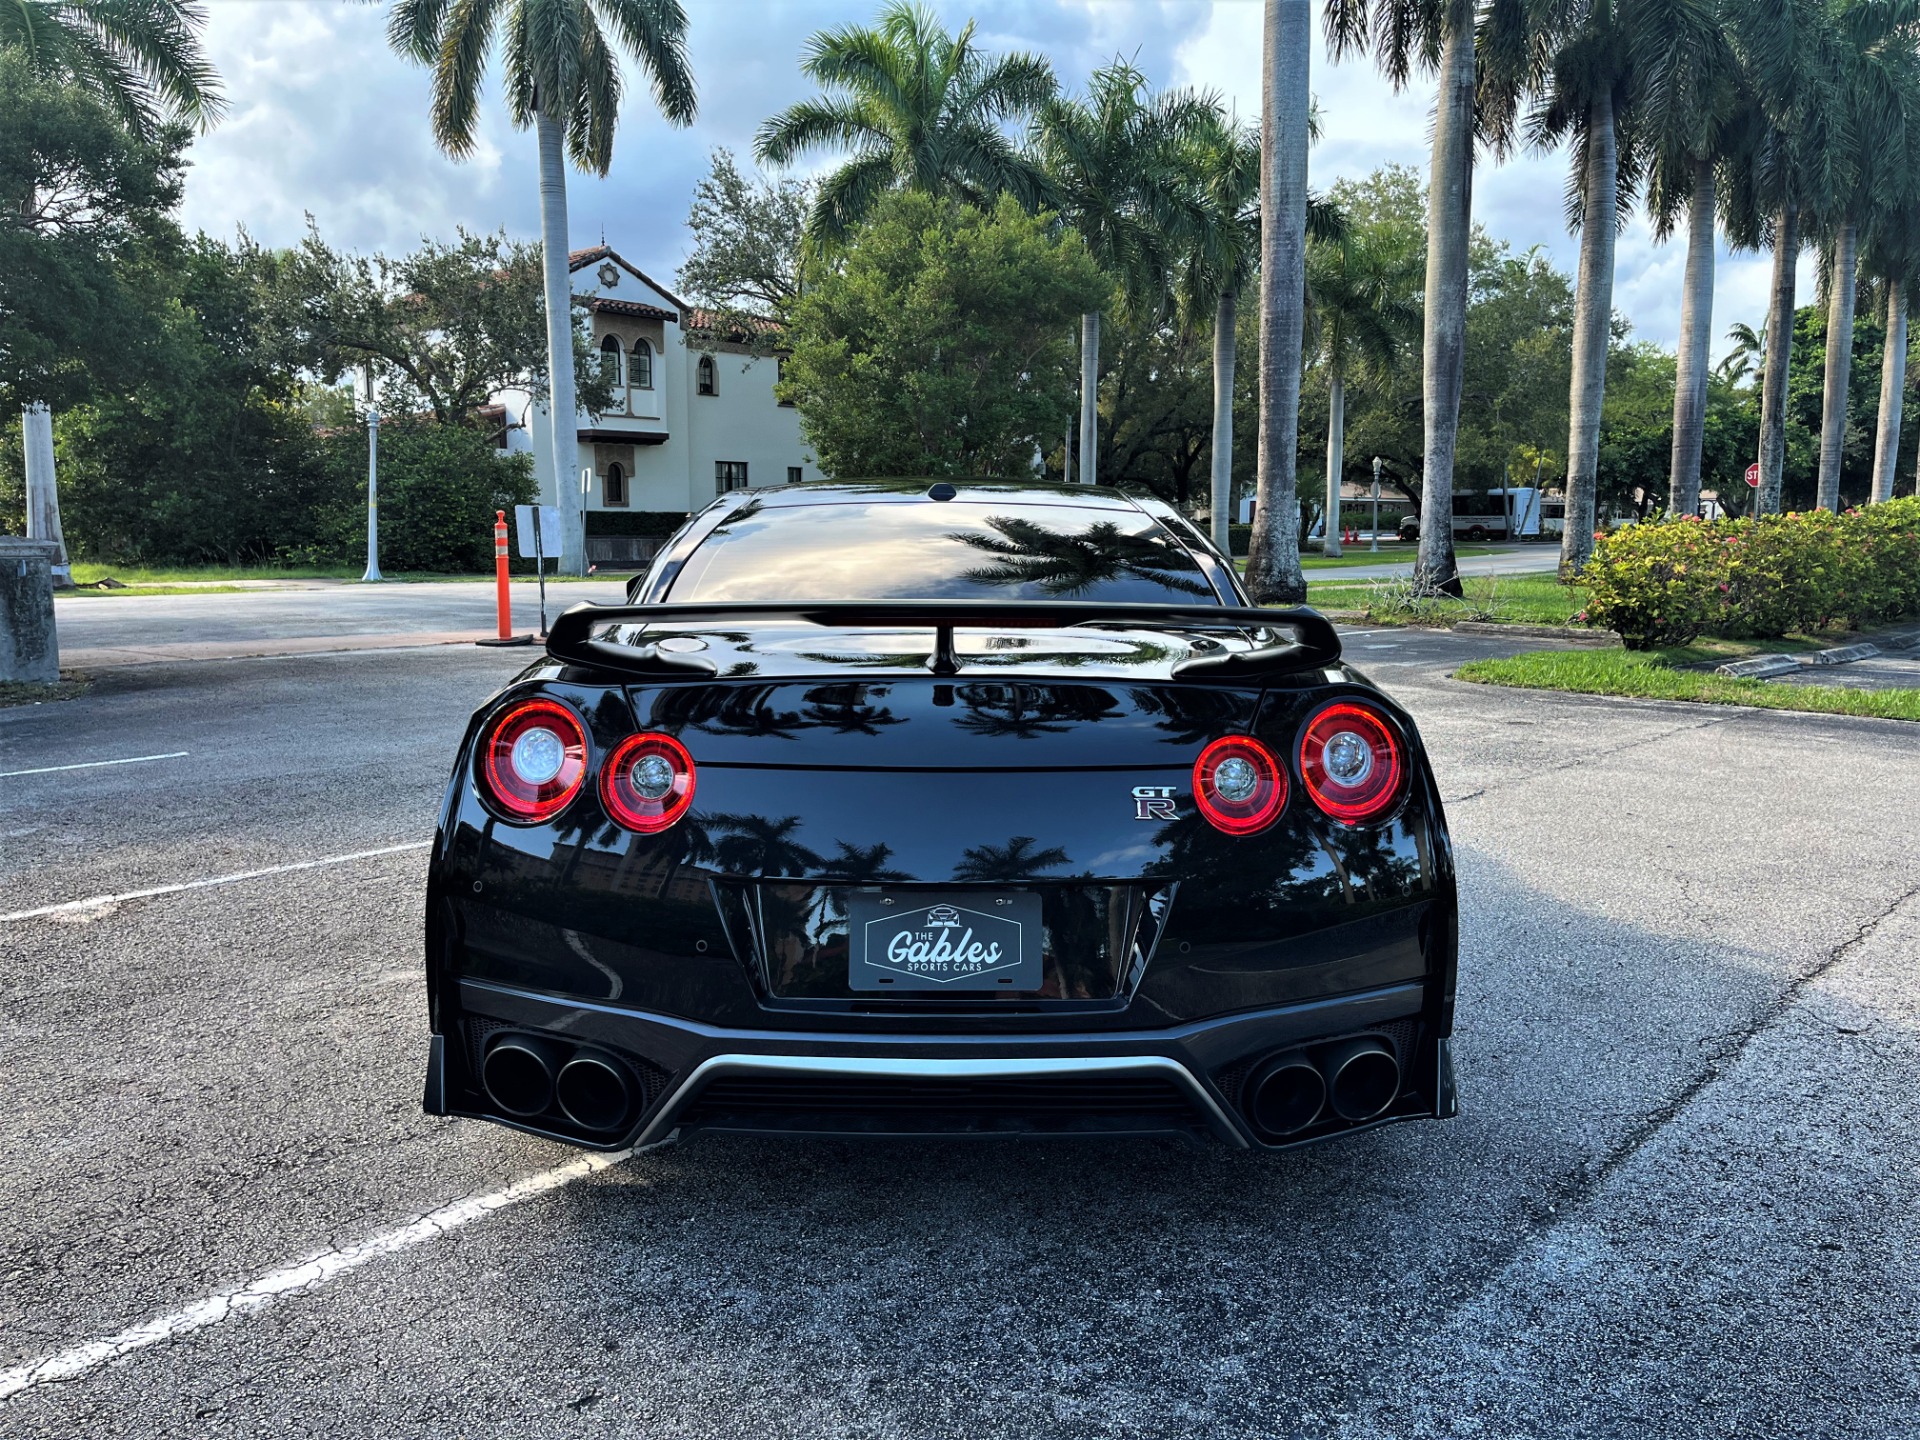 Used 2019 Nissan GT-R Track Edition for sale $129,850 at The Gables Sports Cars in Miami FL 33146 4